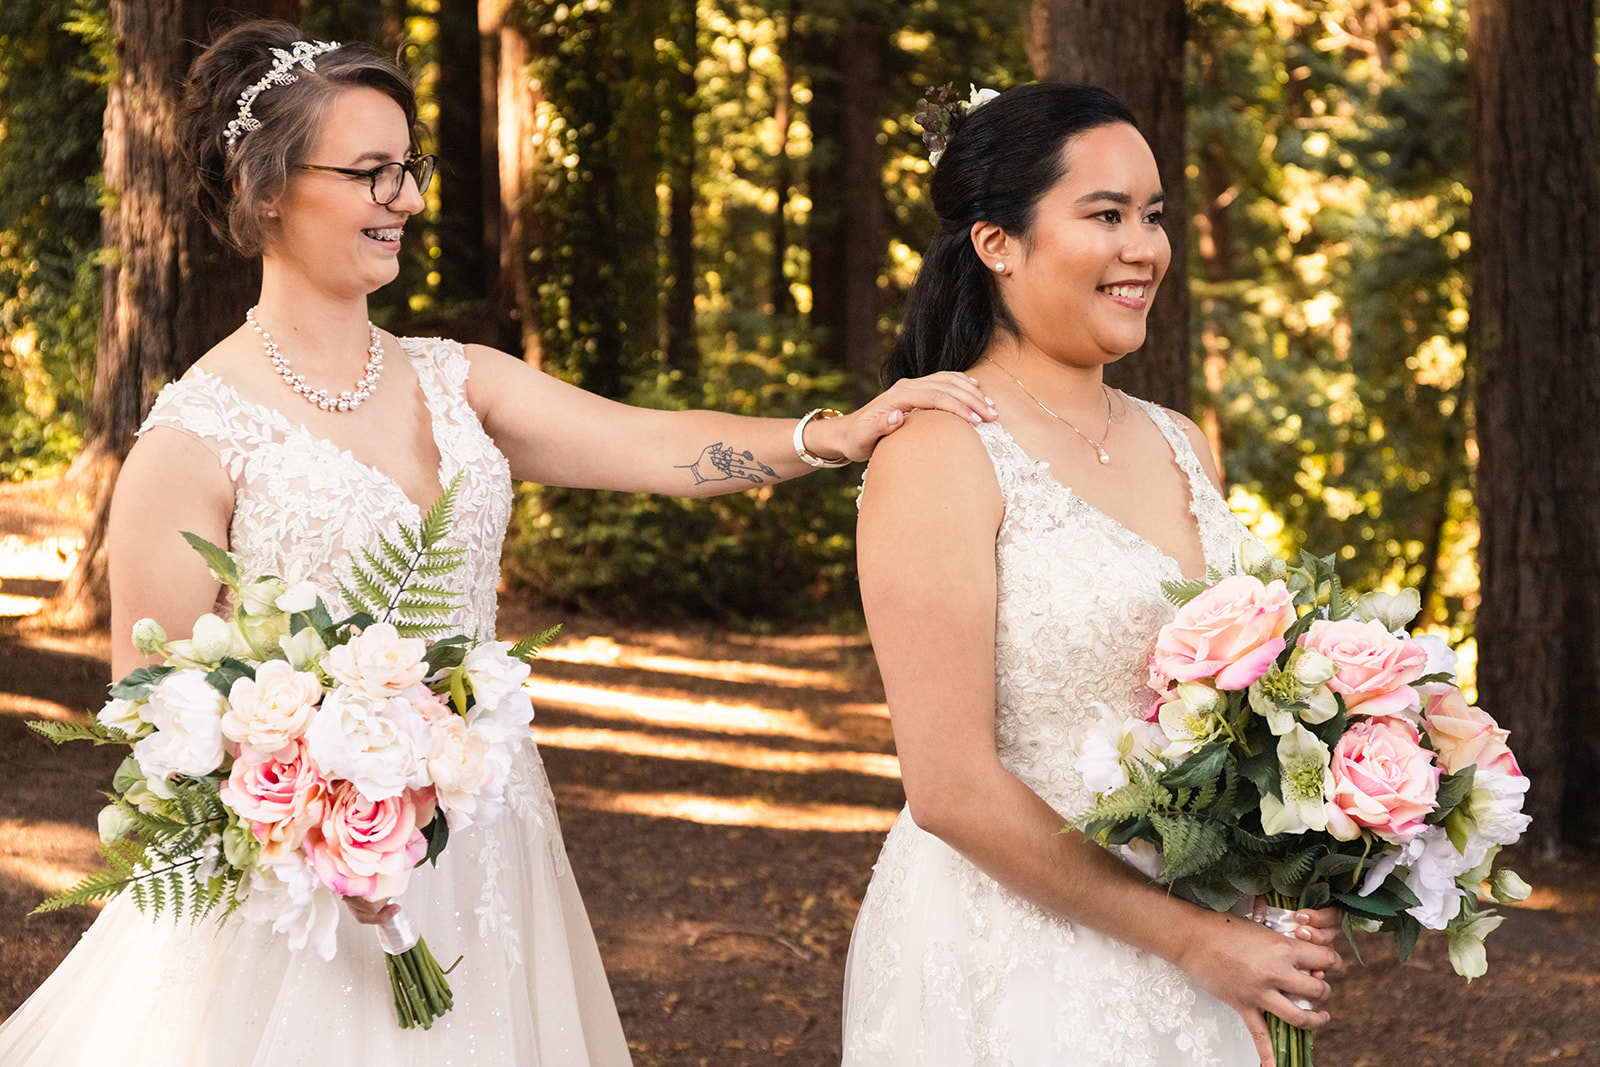 Two brides share their first look at their intimate wedding